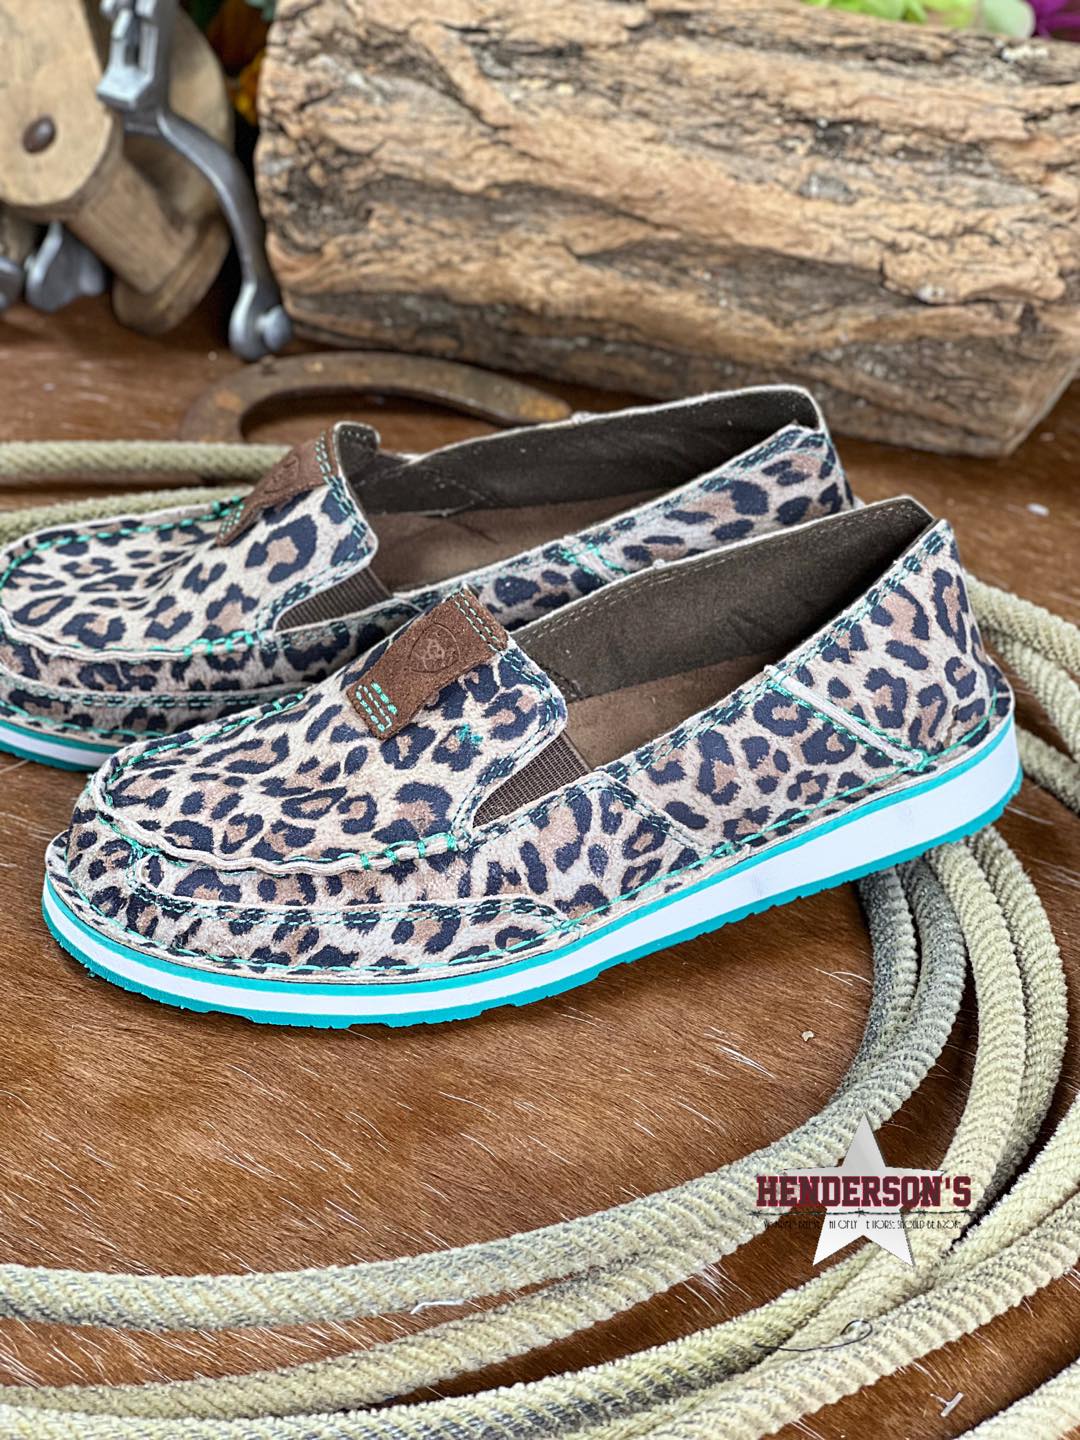 turqose leopard print wedges for women